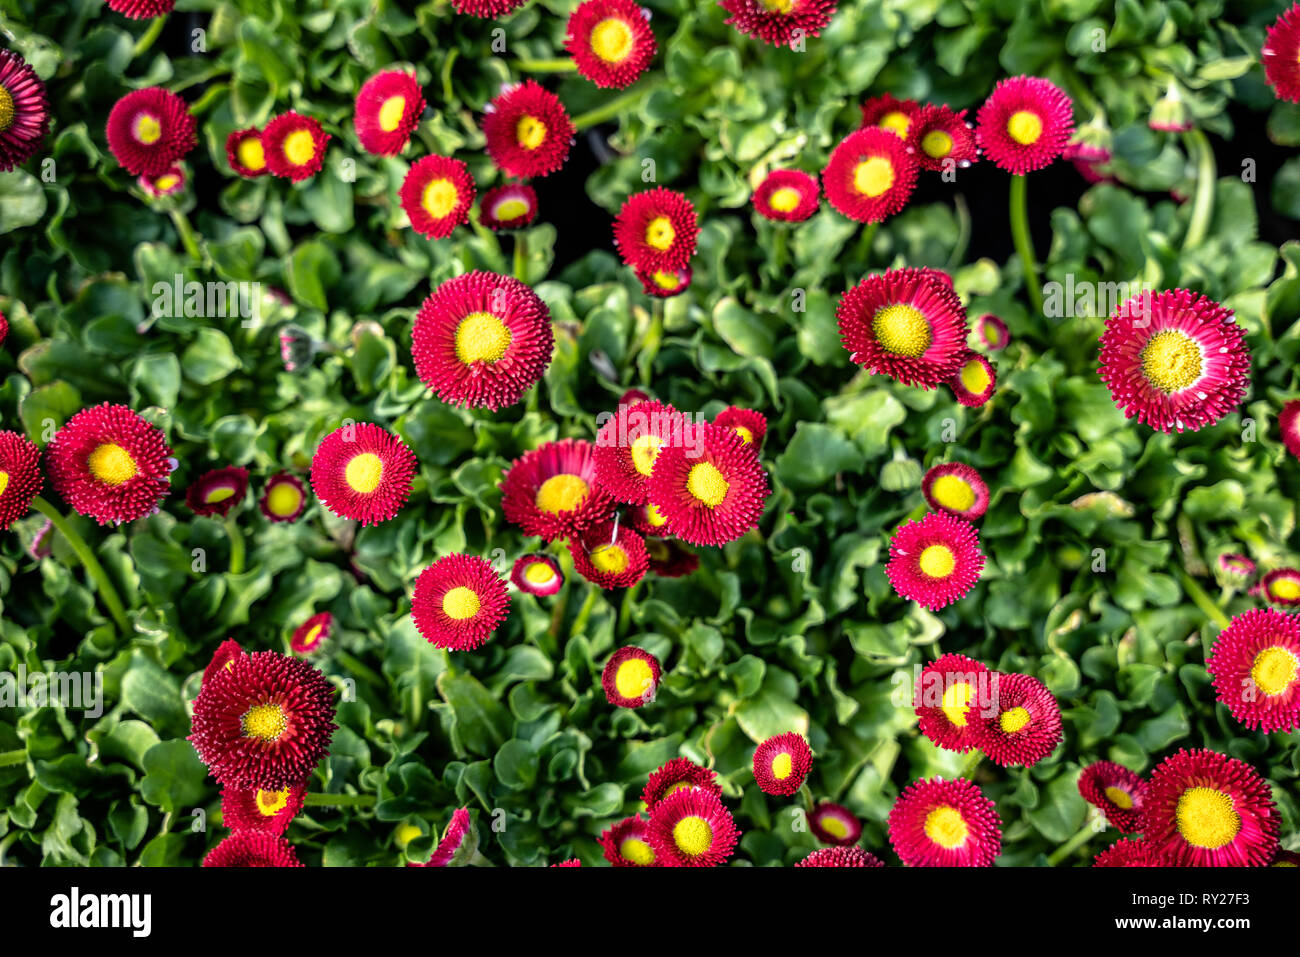 pink red daisy flowers Stock Photo